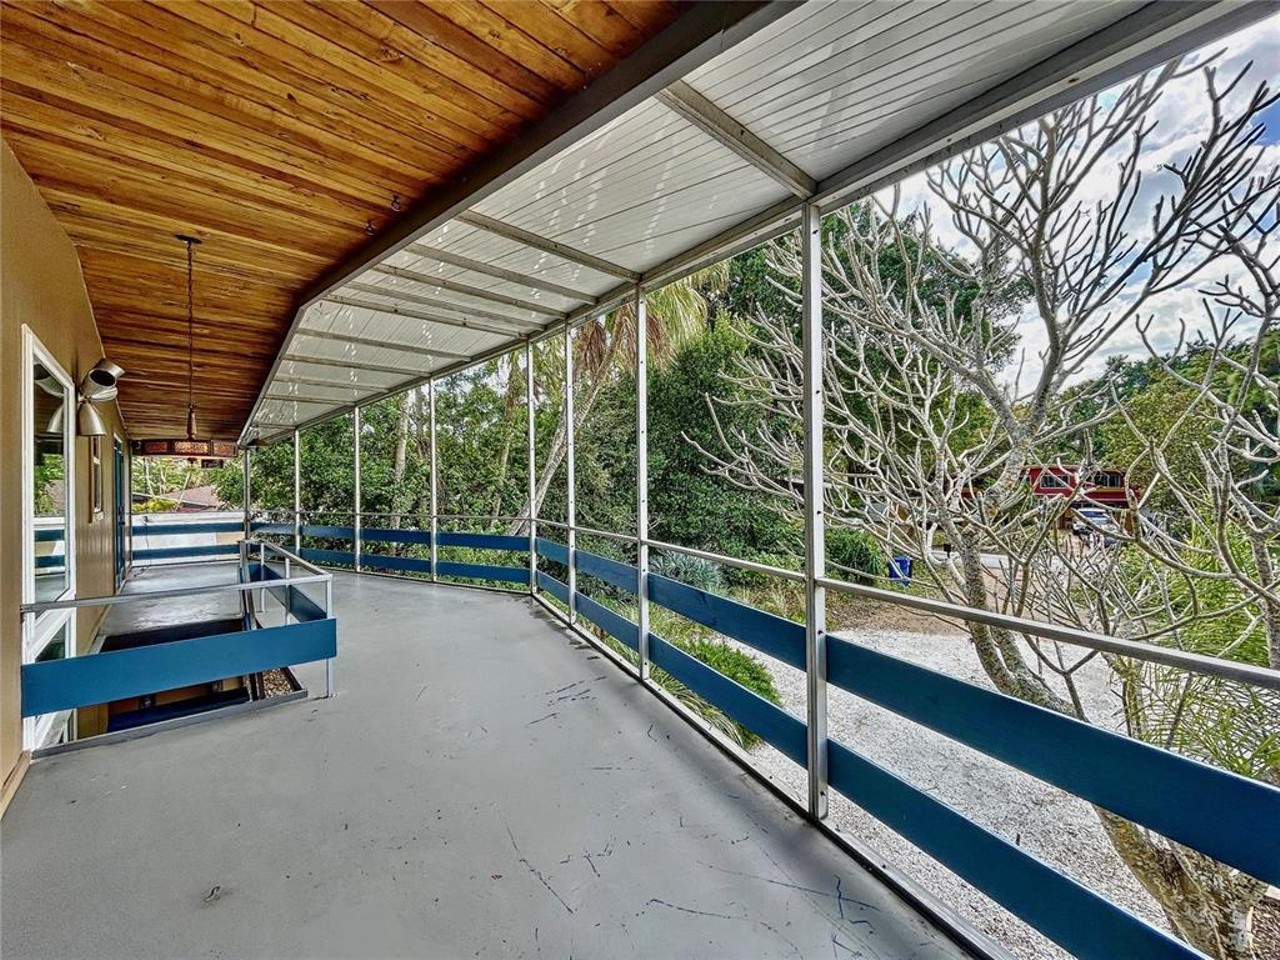 A rare midcentury 'Bird Cage' home in St. Petersburg is back on the market